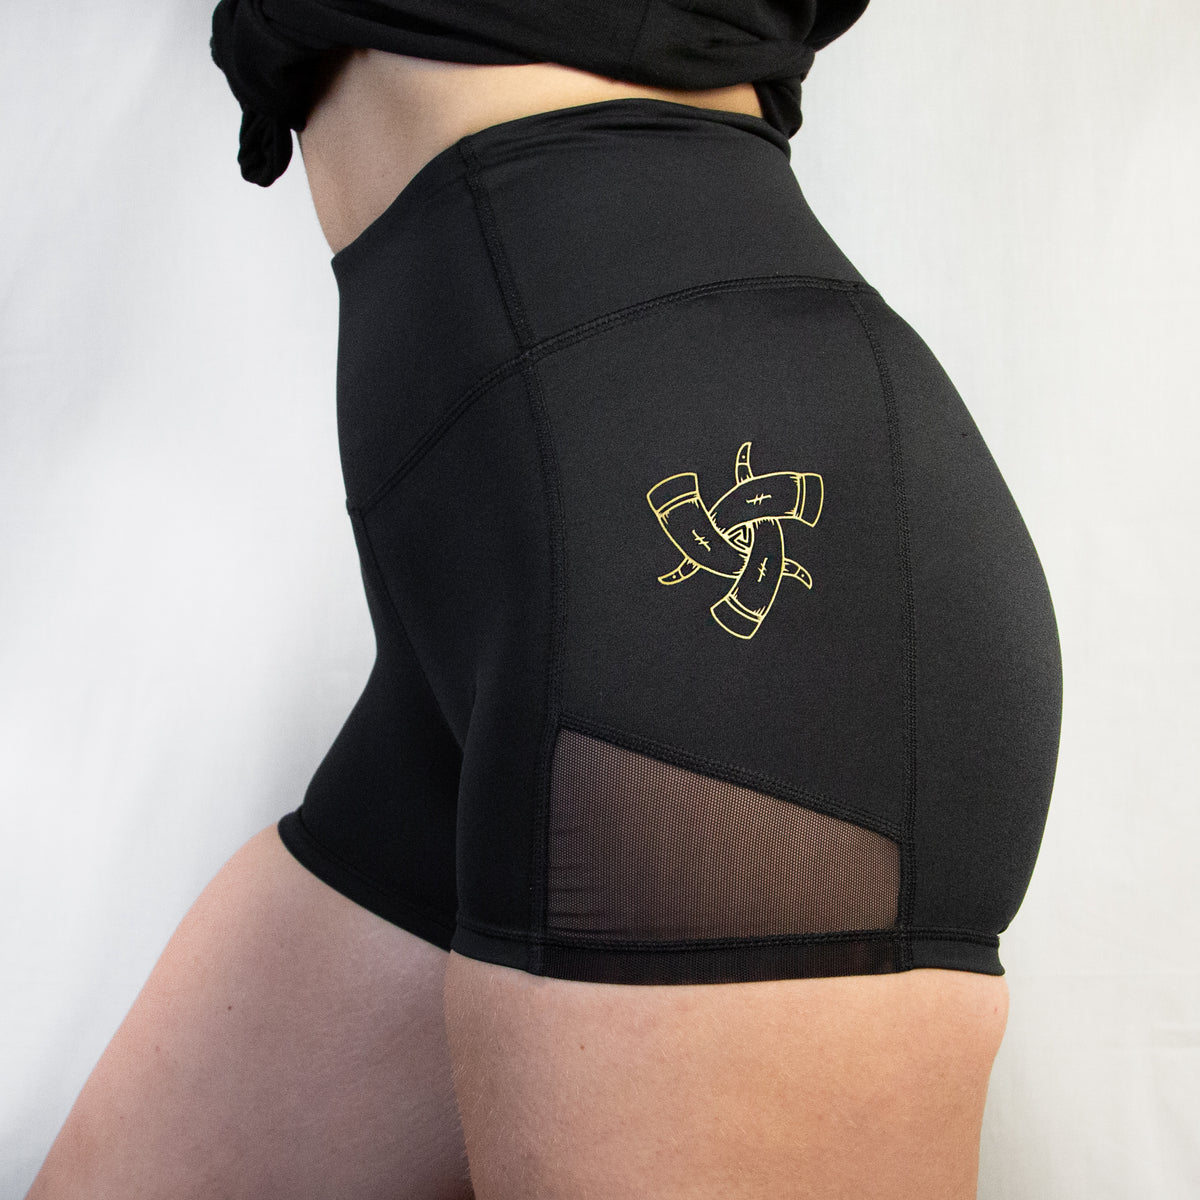 Women's Compression Shorts, Black performance gym shorts with gold detailing 